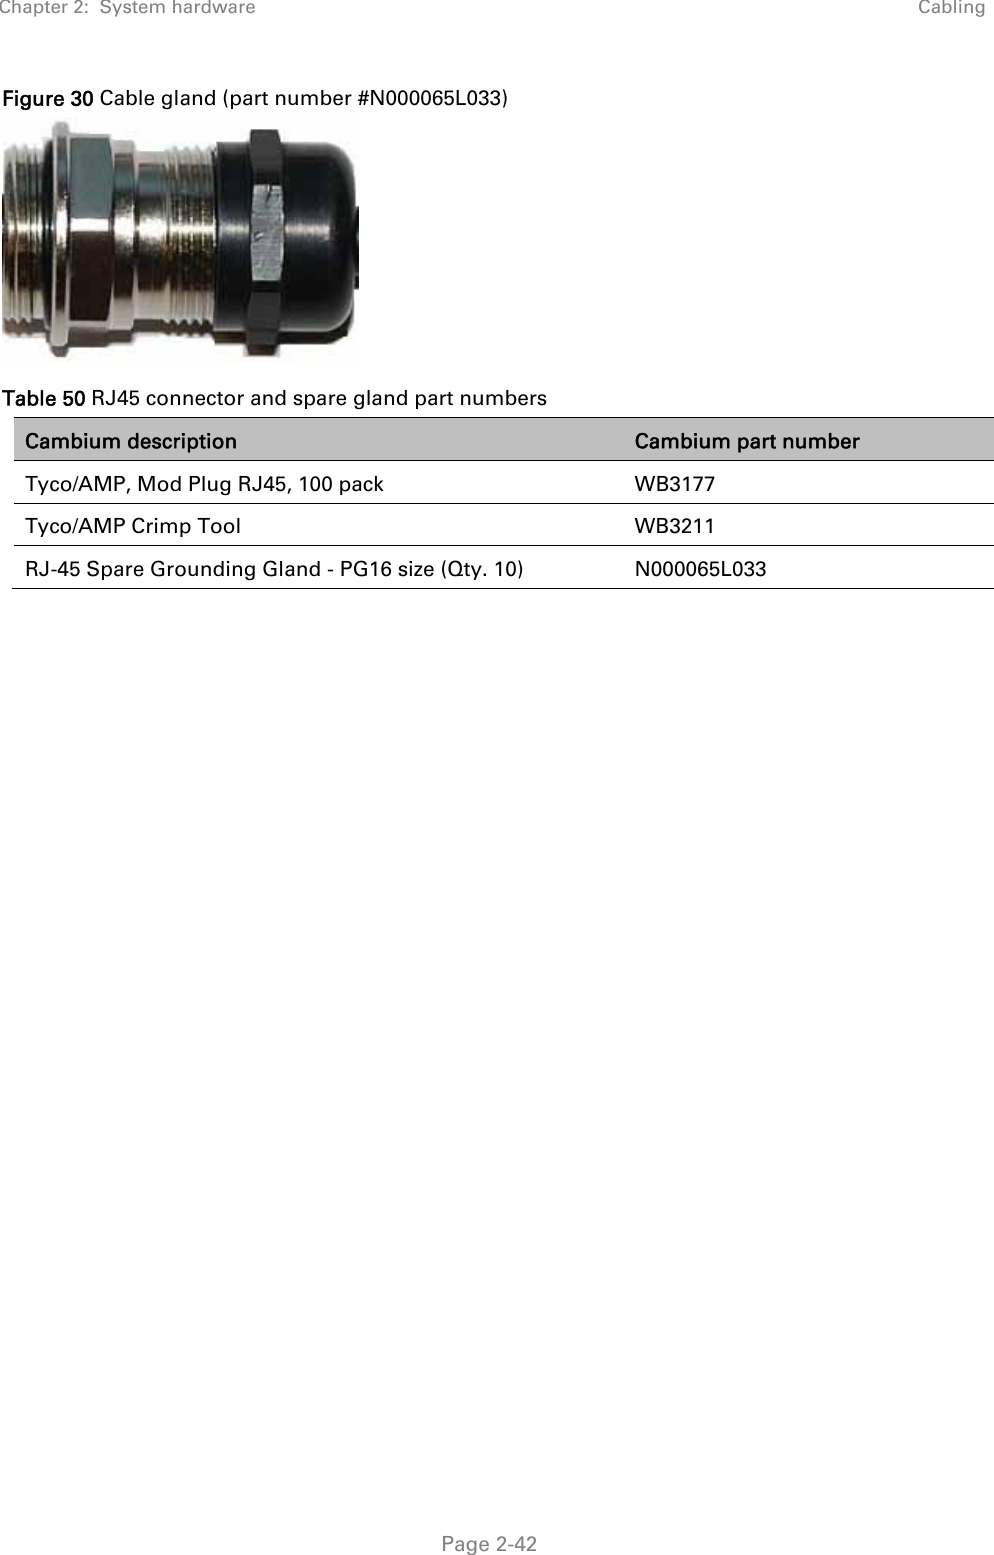 Chapter 2:  System hardware  Cabling   Page 2-42 Figure 30 Cable gland (part number #N000065L033)  Table 50 RJ45 connector and spare gland part numbers Cambium description  Cambium part number Tyco/AMP, Mod Plug RJ45, 100 pack  WB3177 Tyco/AMP Crimp Tool  WB3211 RJ-45 Spare Grounding Gland - PG16 size (Qty. 10)  N000065L033    